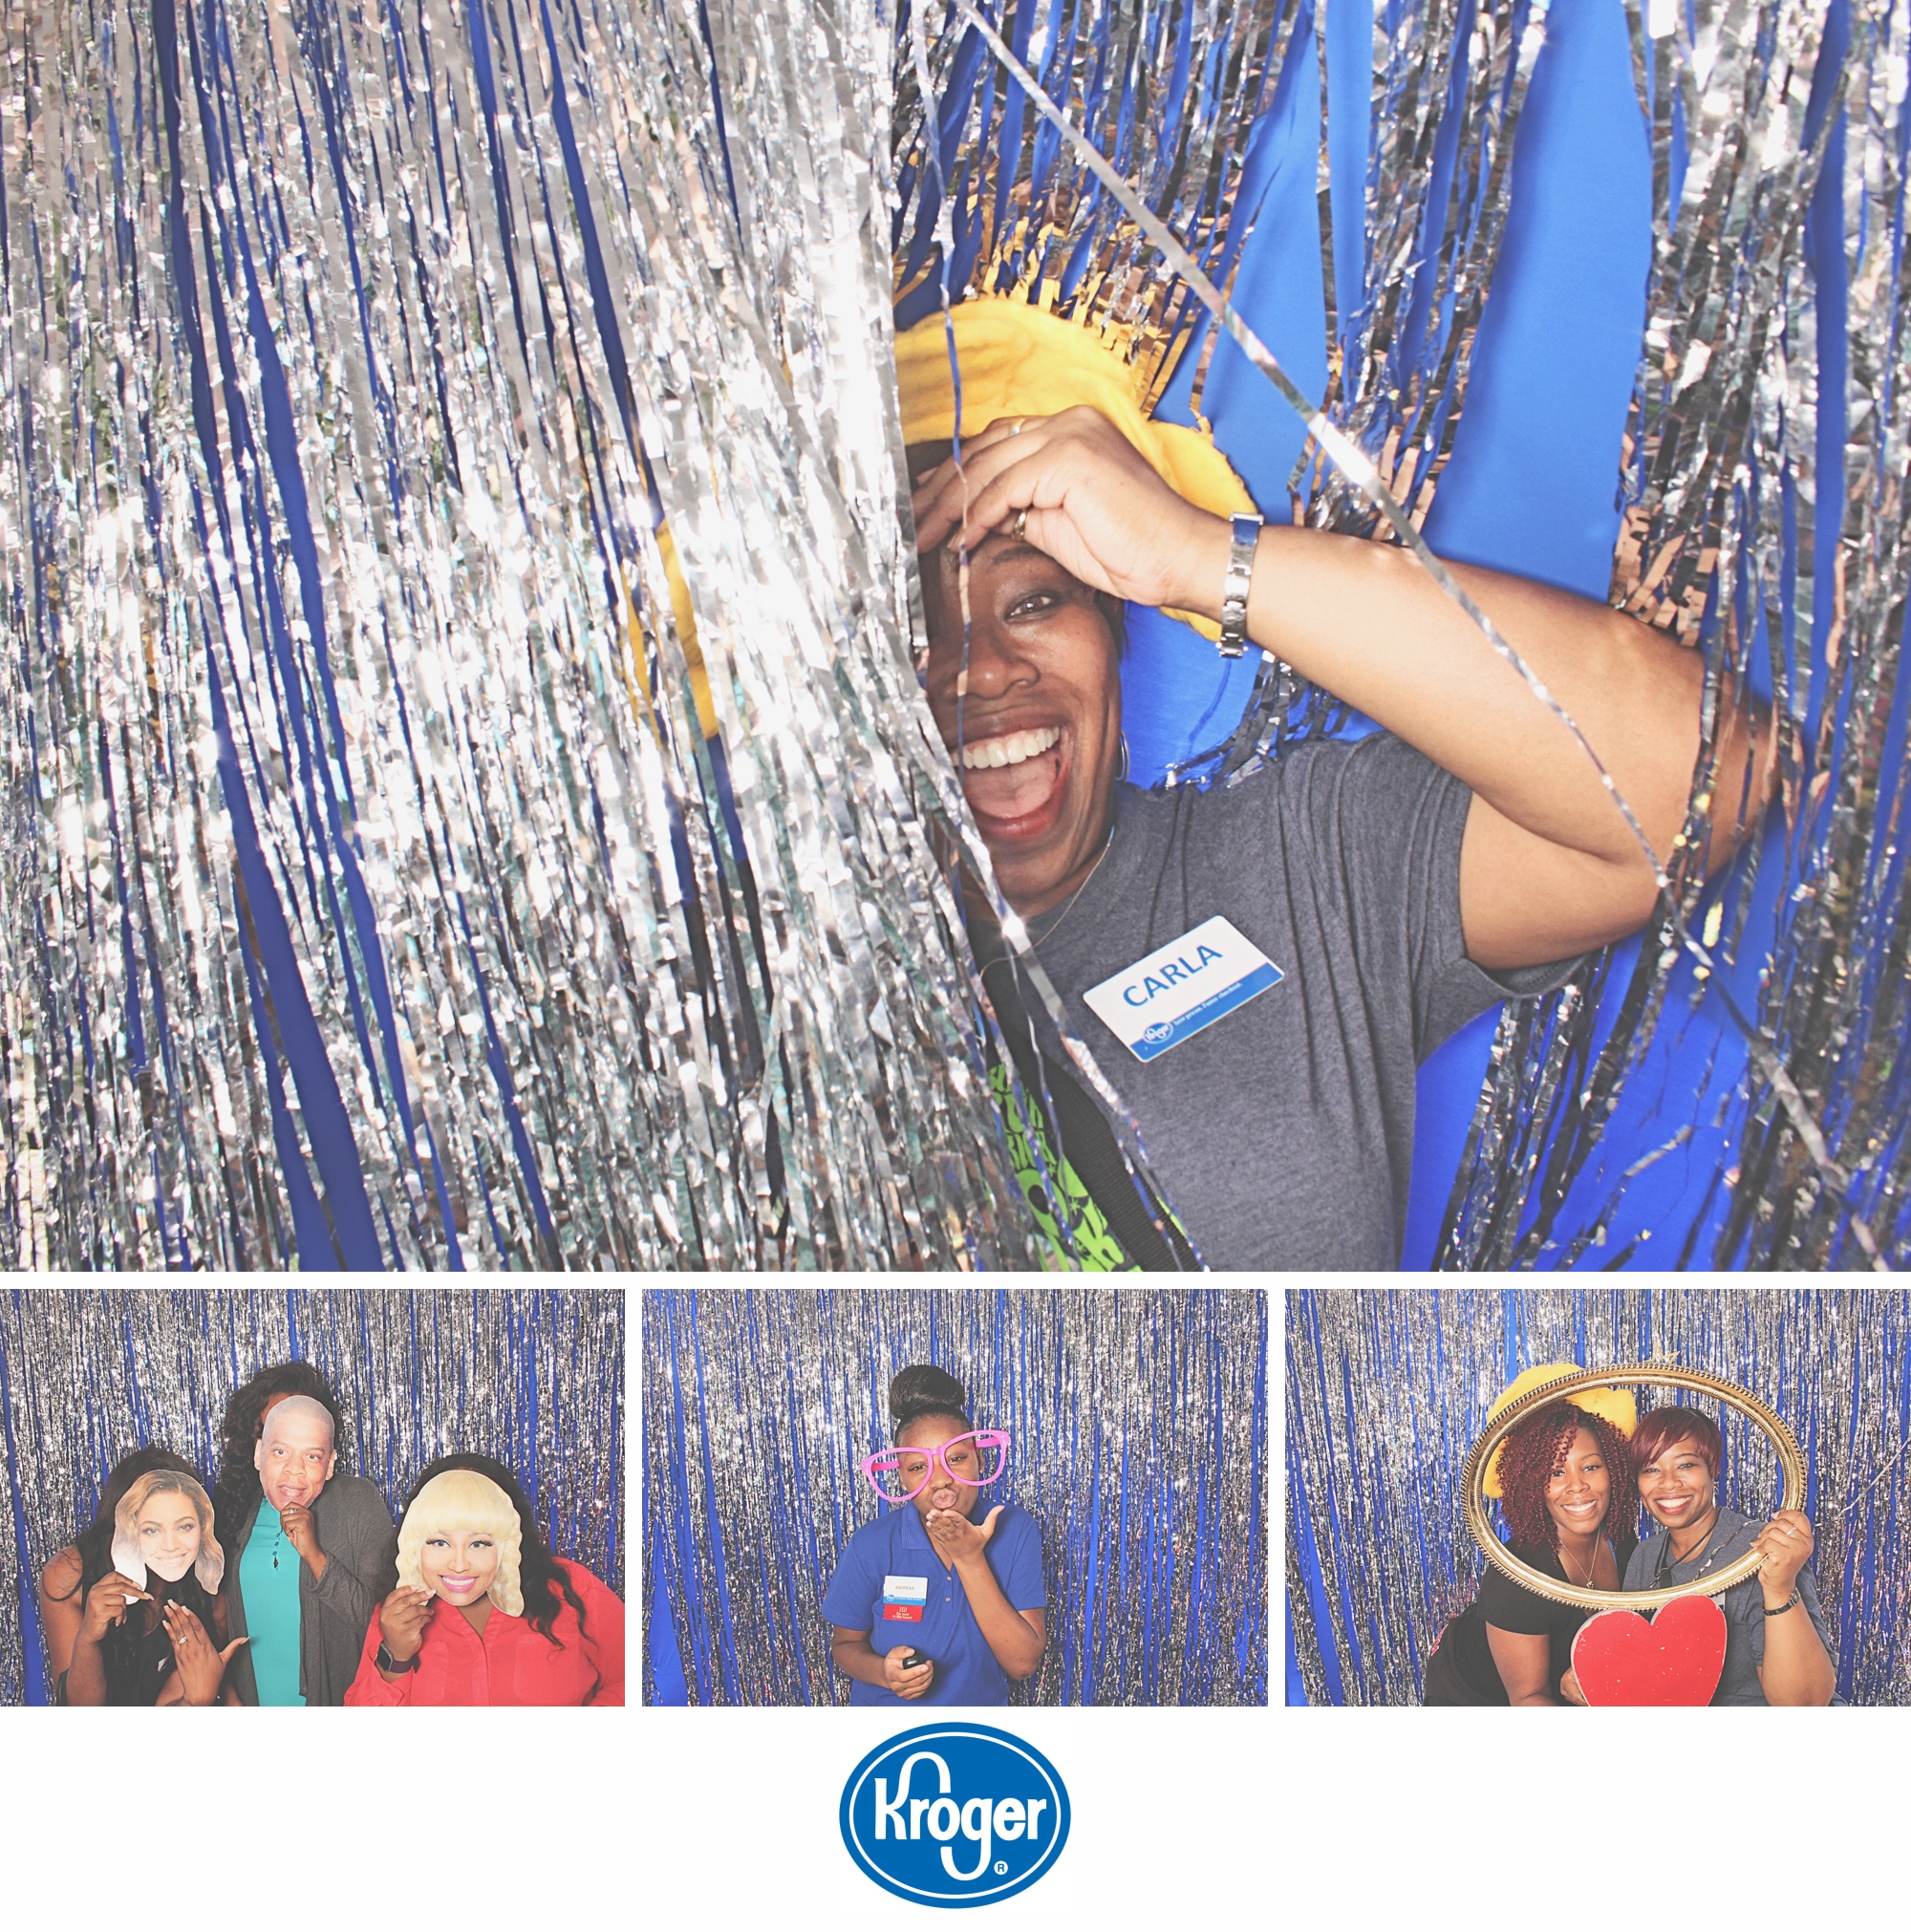 kroger-corporate-photo-booth-robot-booth-1